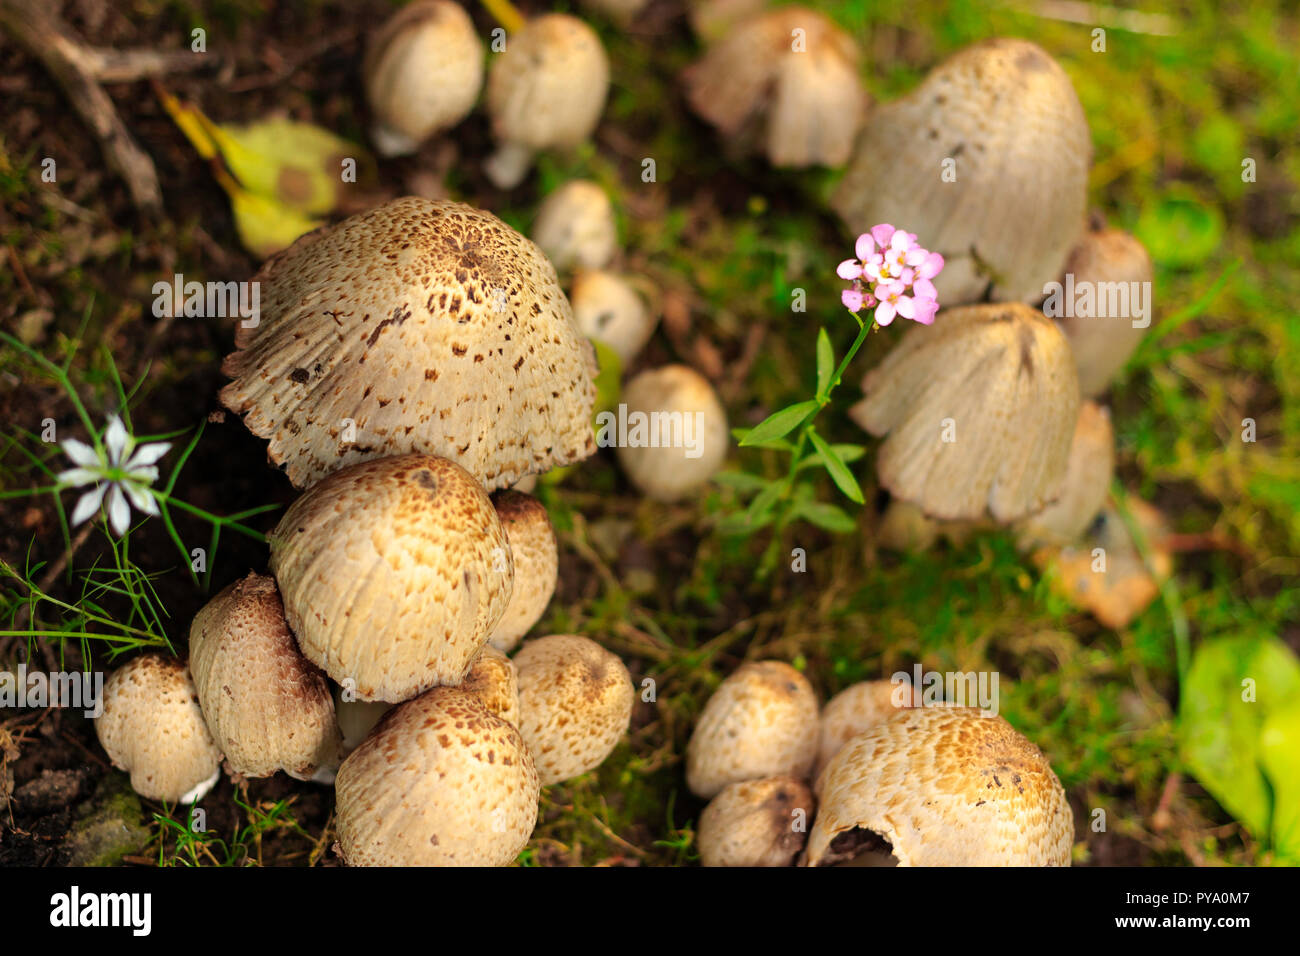 An image of a cluster of mushrooms/fungi growing in a garden with two garden flowers growing among the cluster. Stock Photo